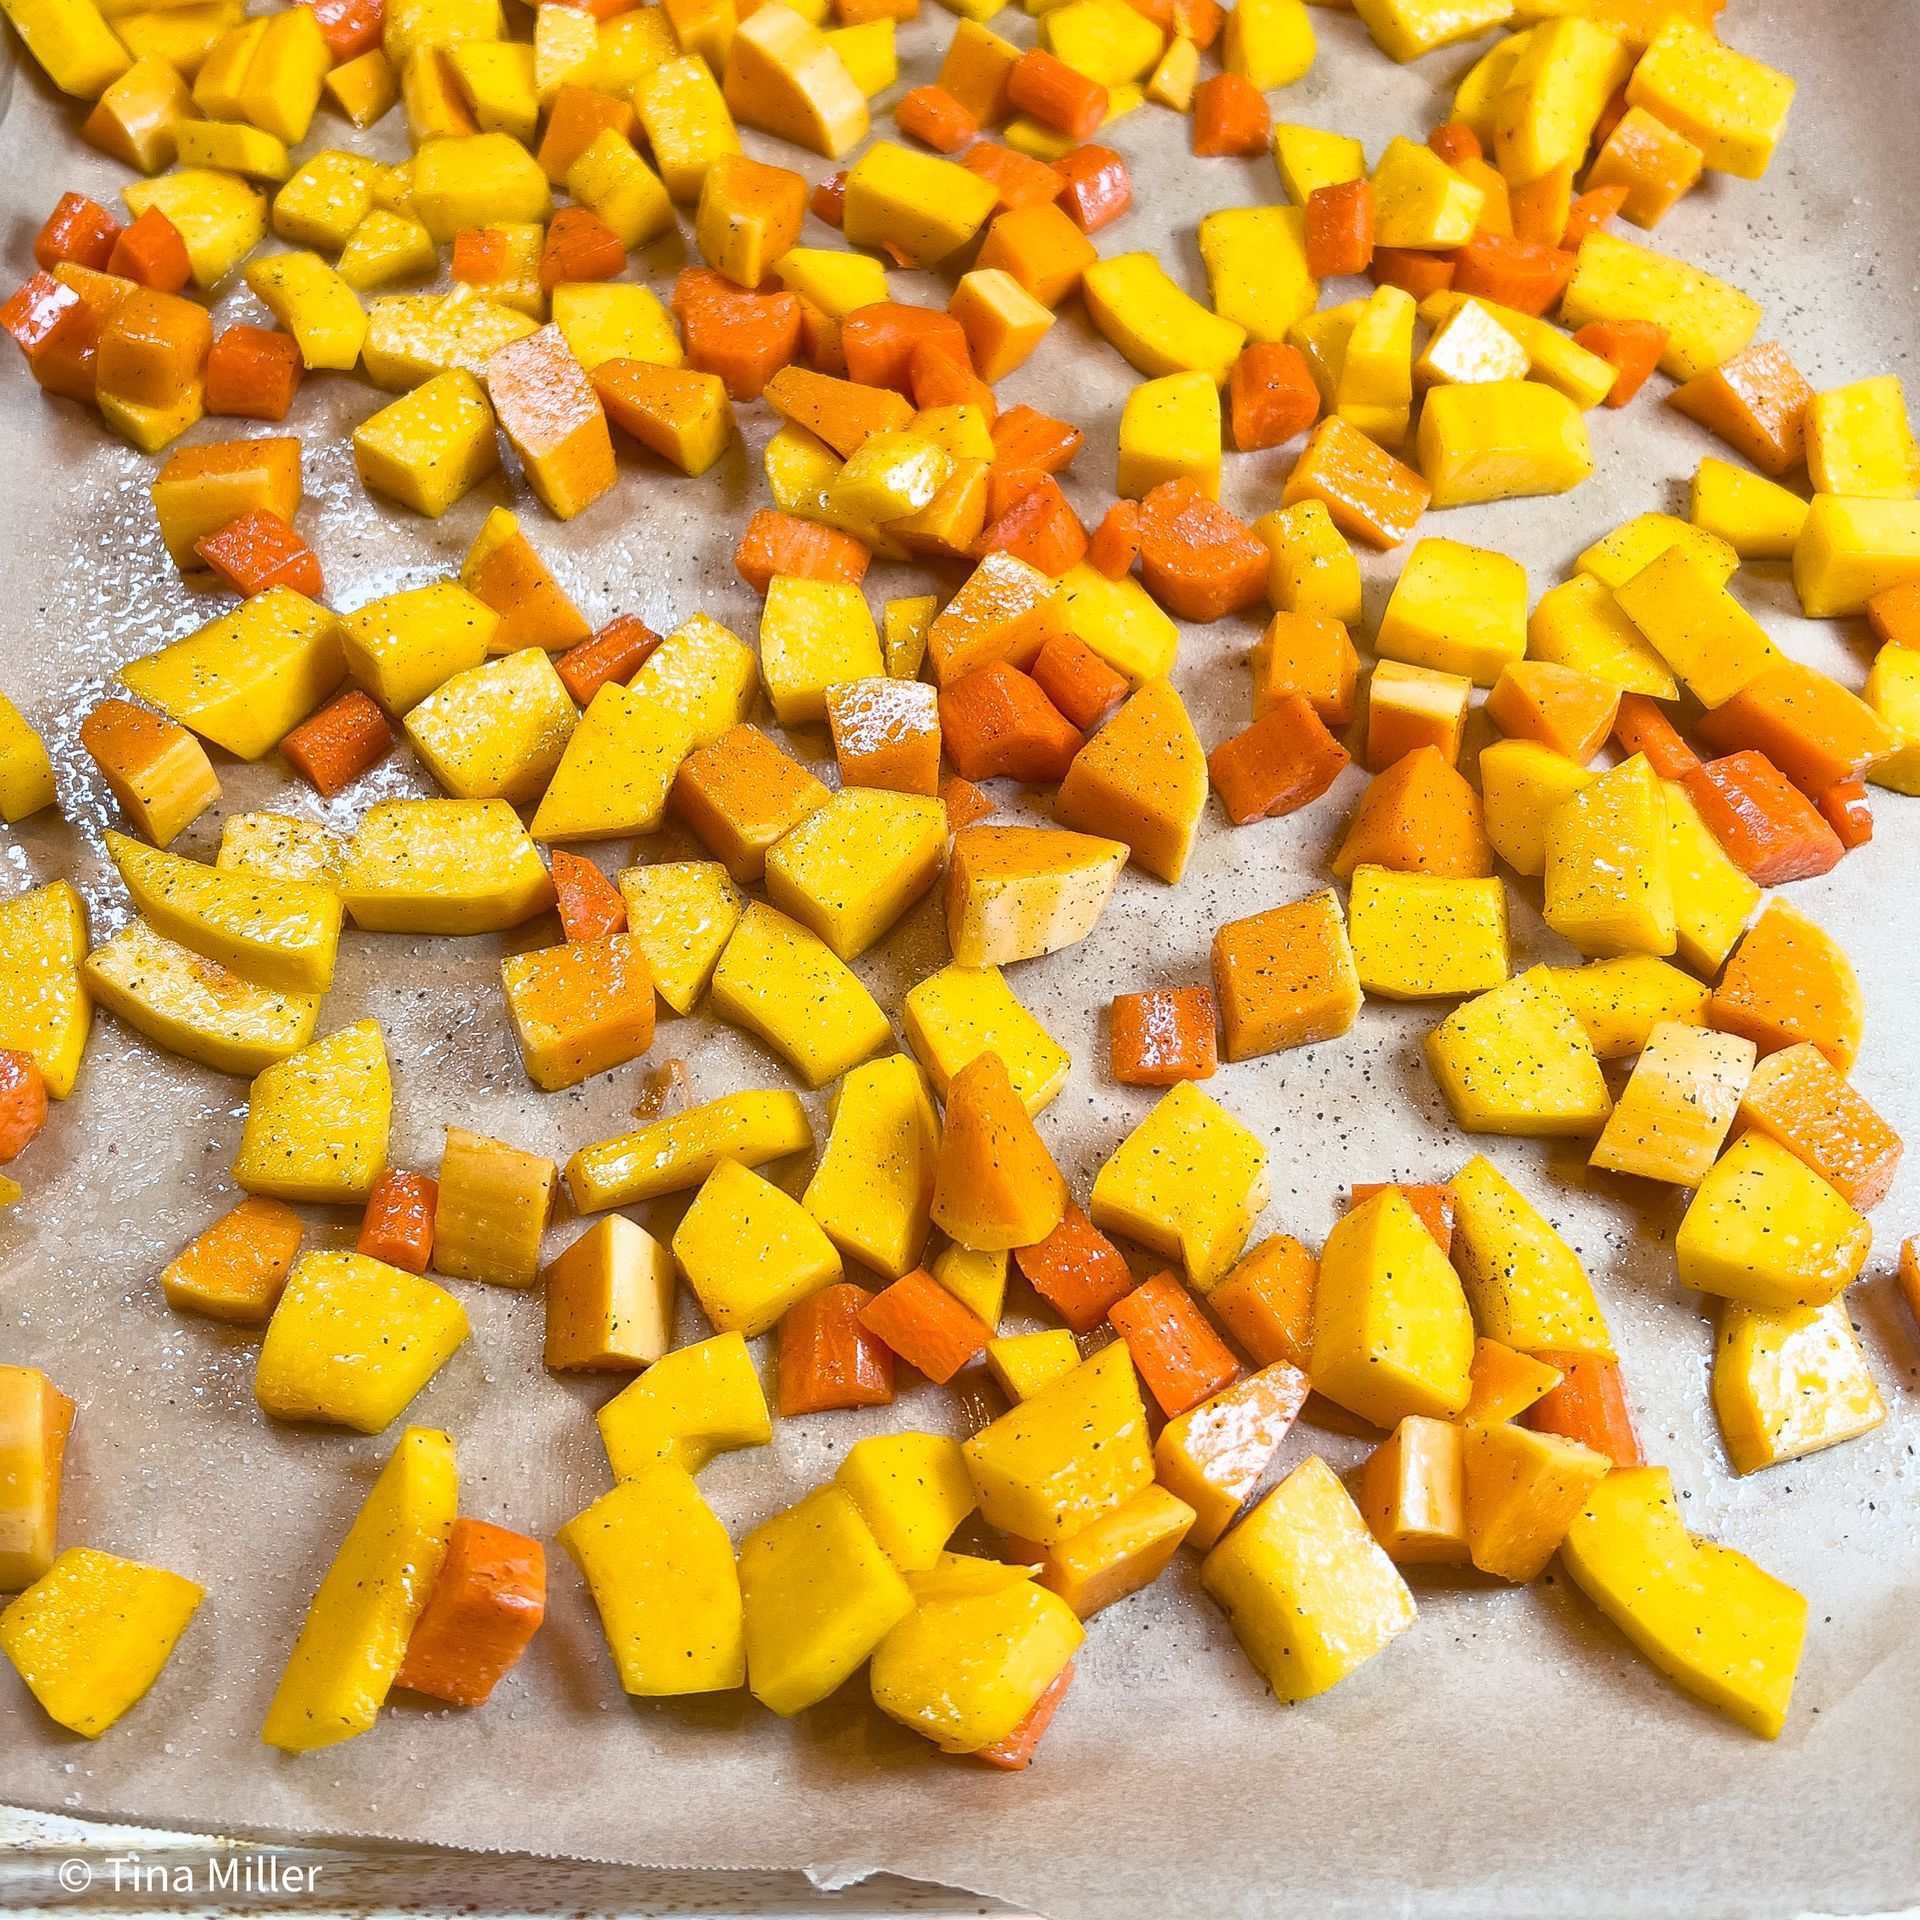 Candyroaster squash, butternut squash, and carrots on a sheet of parchment paper on a sheet pan ready to roast.